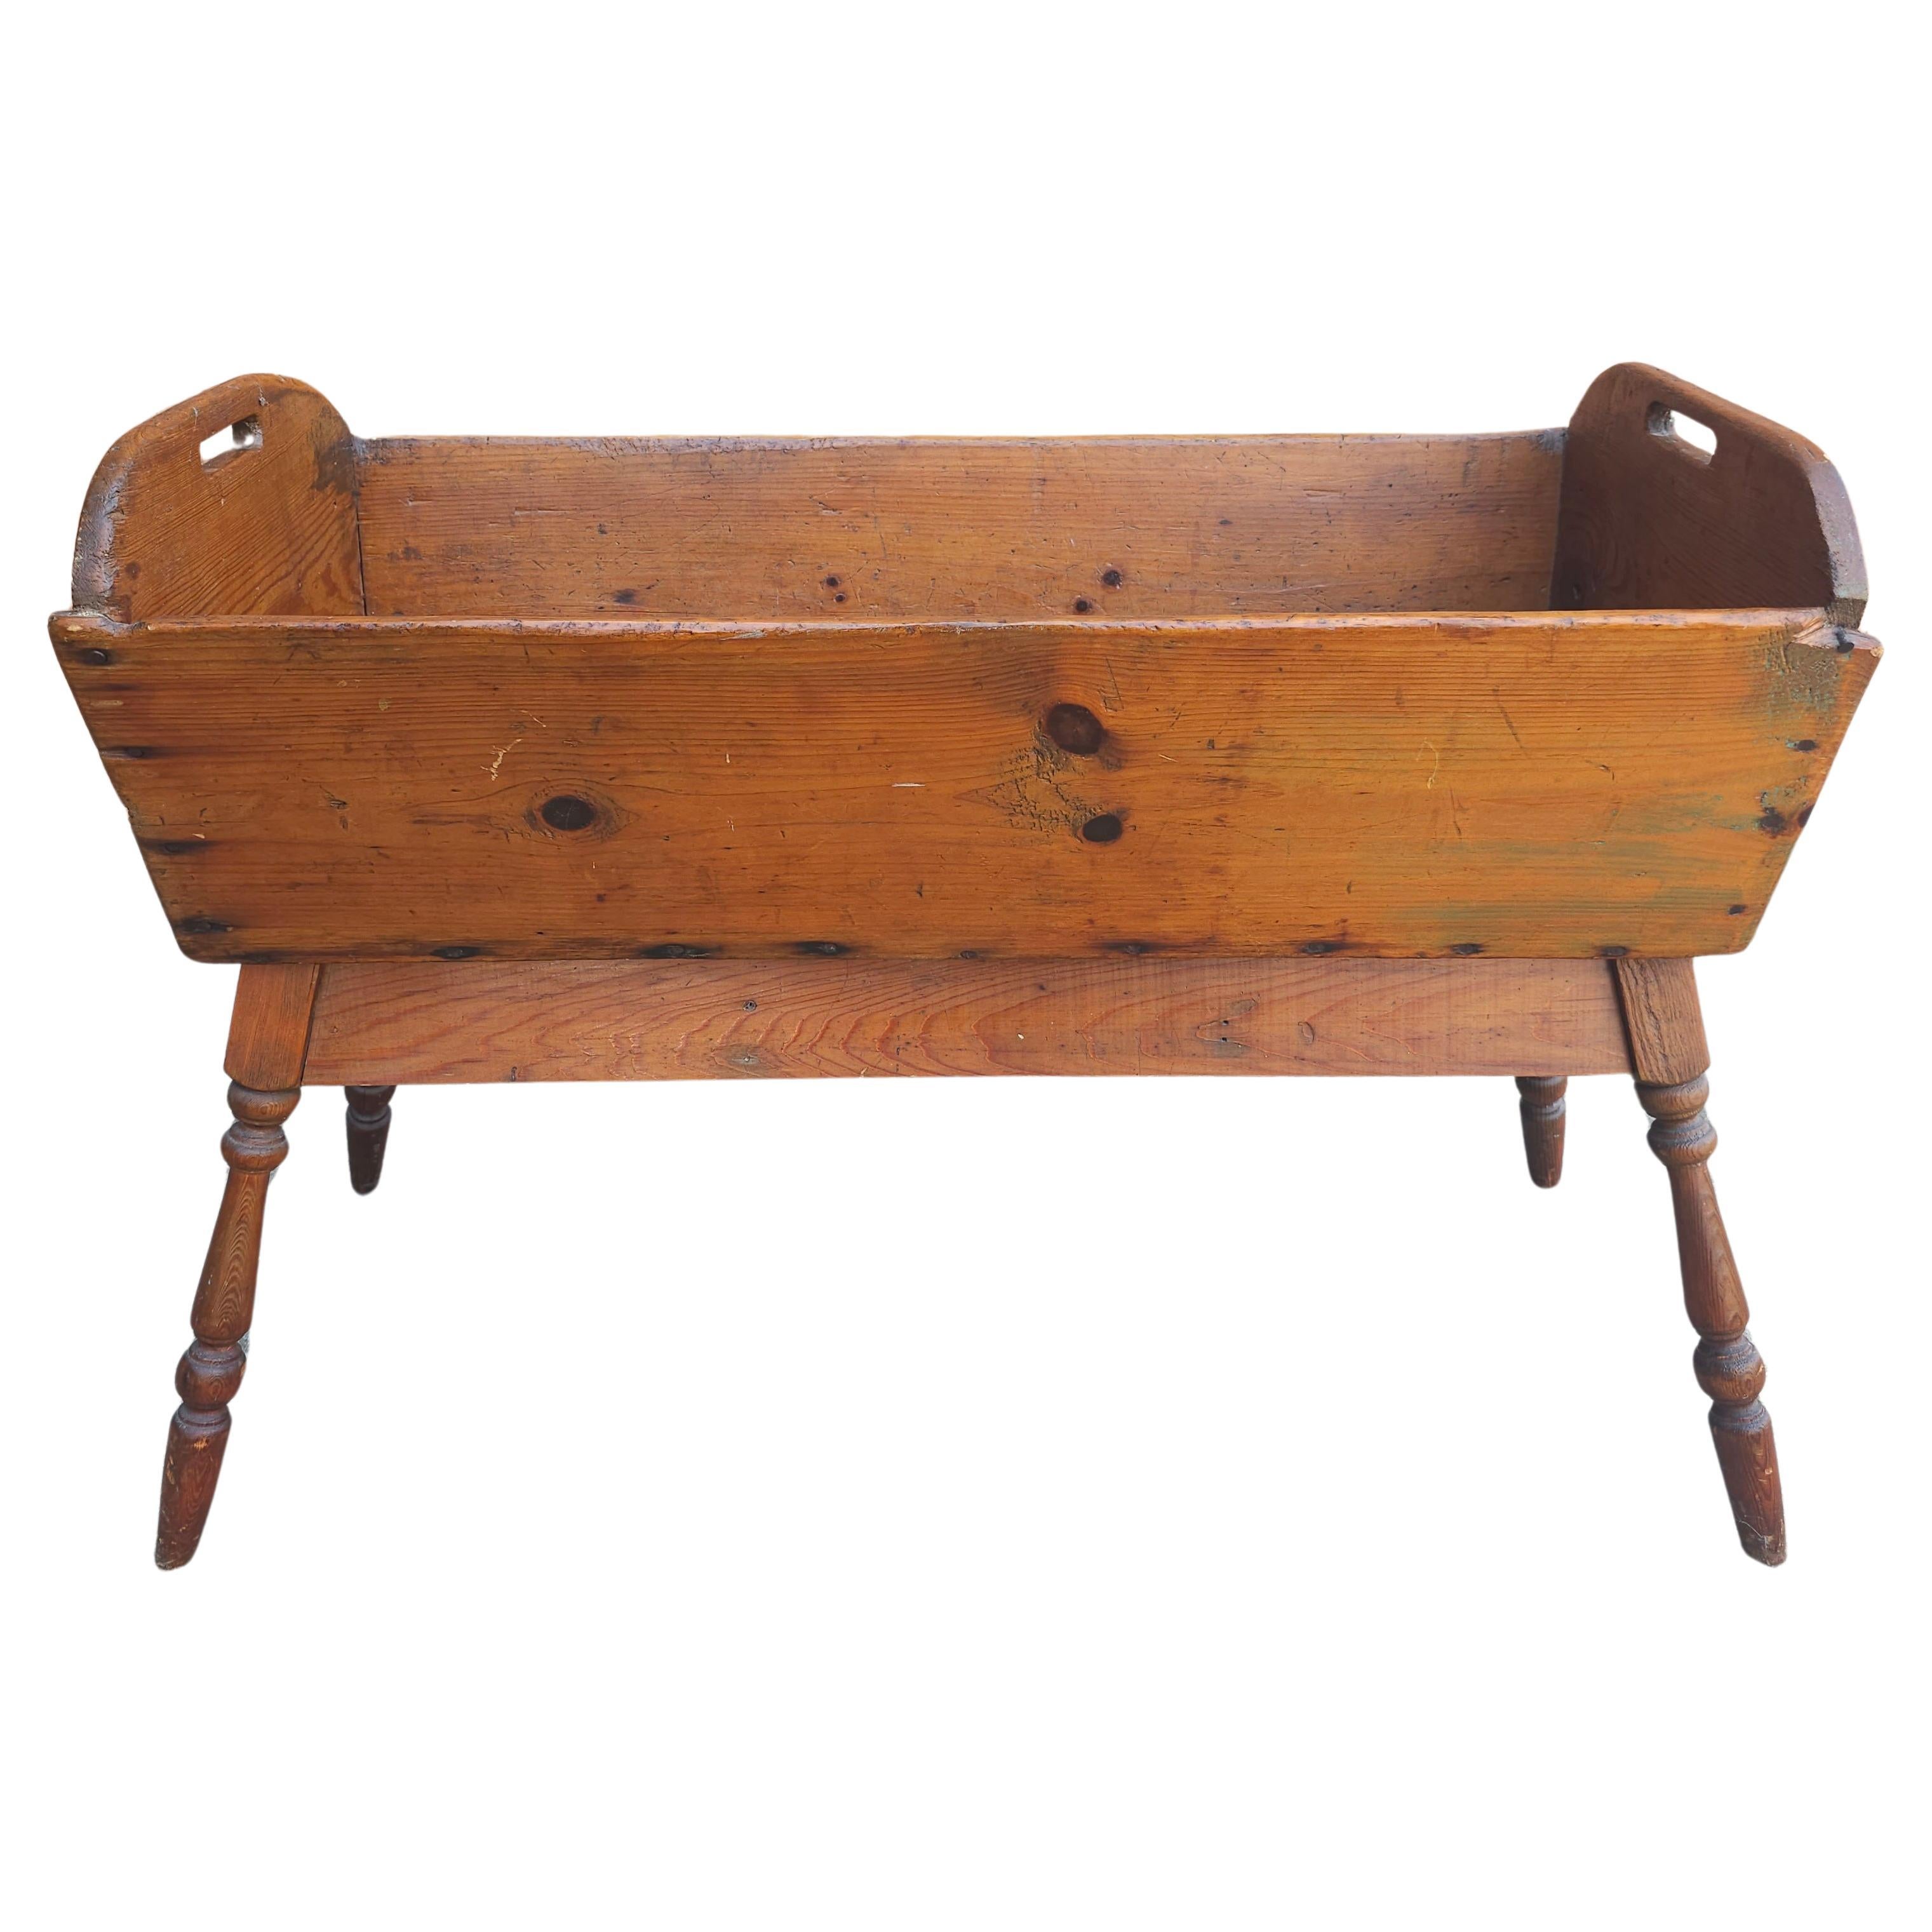 19th Century Pennsylvania Pine Dough Trough / Flower Bed Planter on Stand